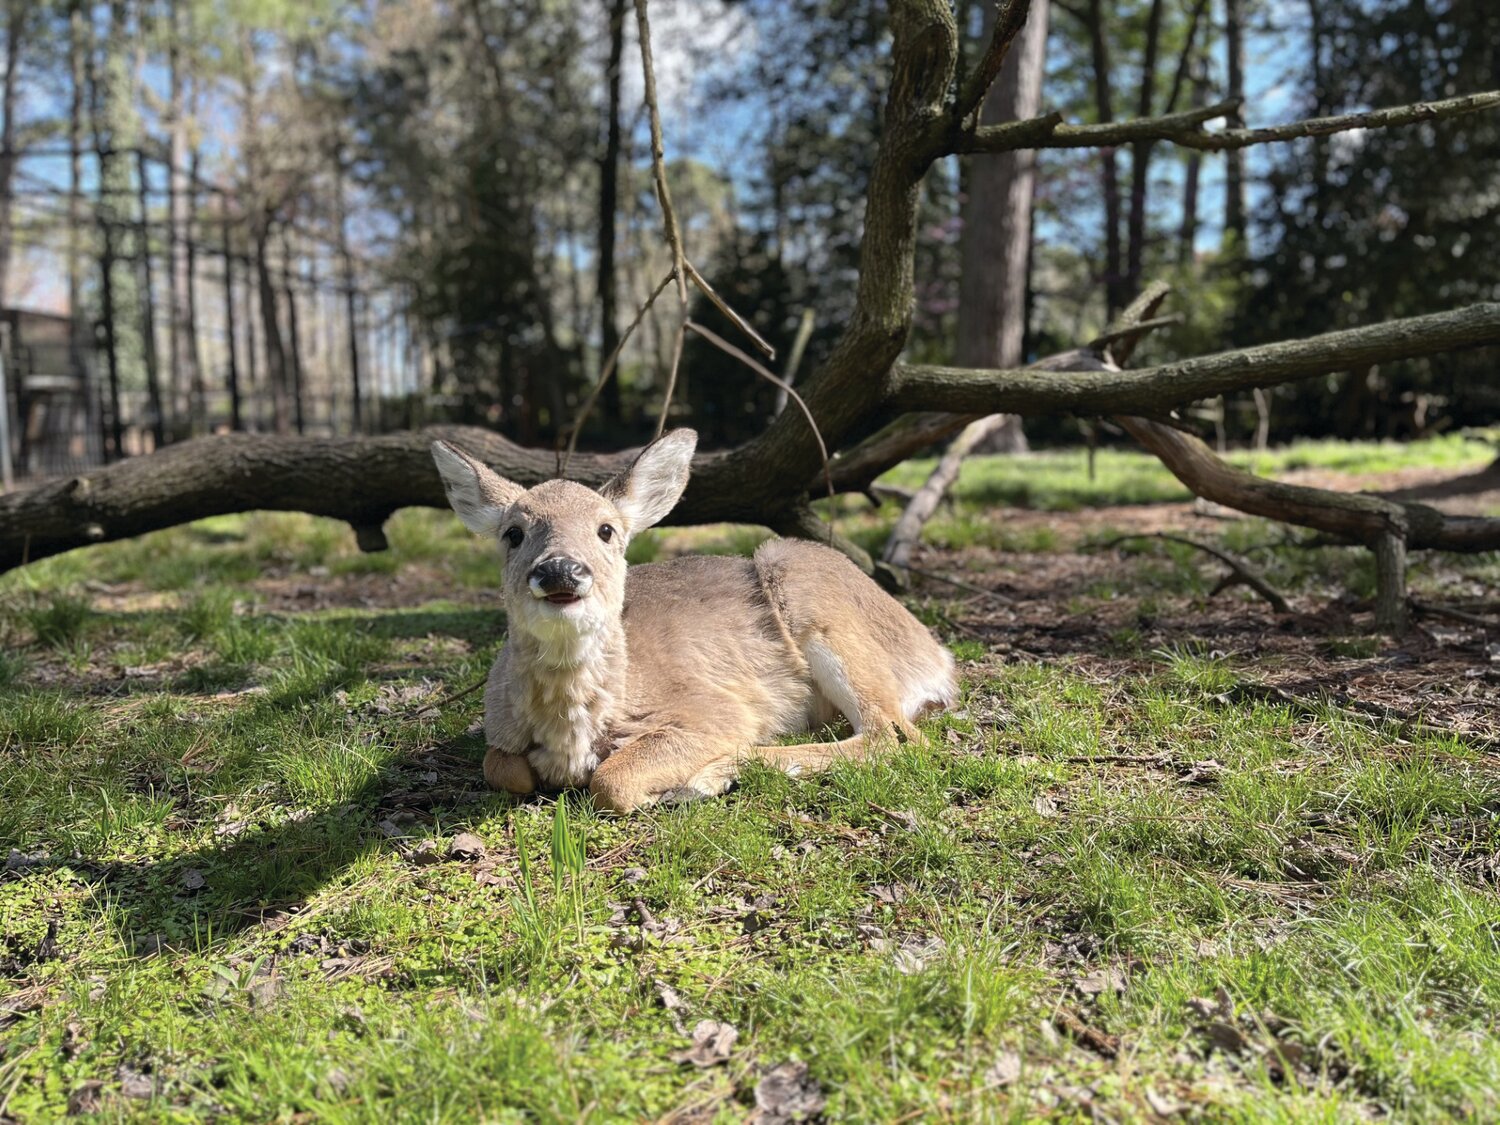 The Salisbury Zoo recently welcomed a second white-tailed deer, Rosie. (Photo courtesy Salisbury Zoo)